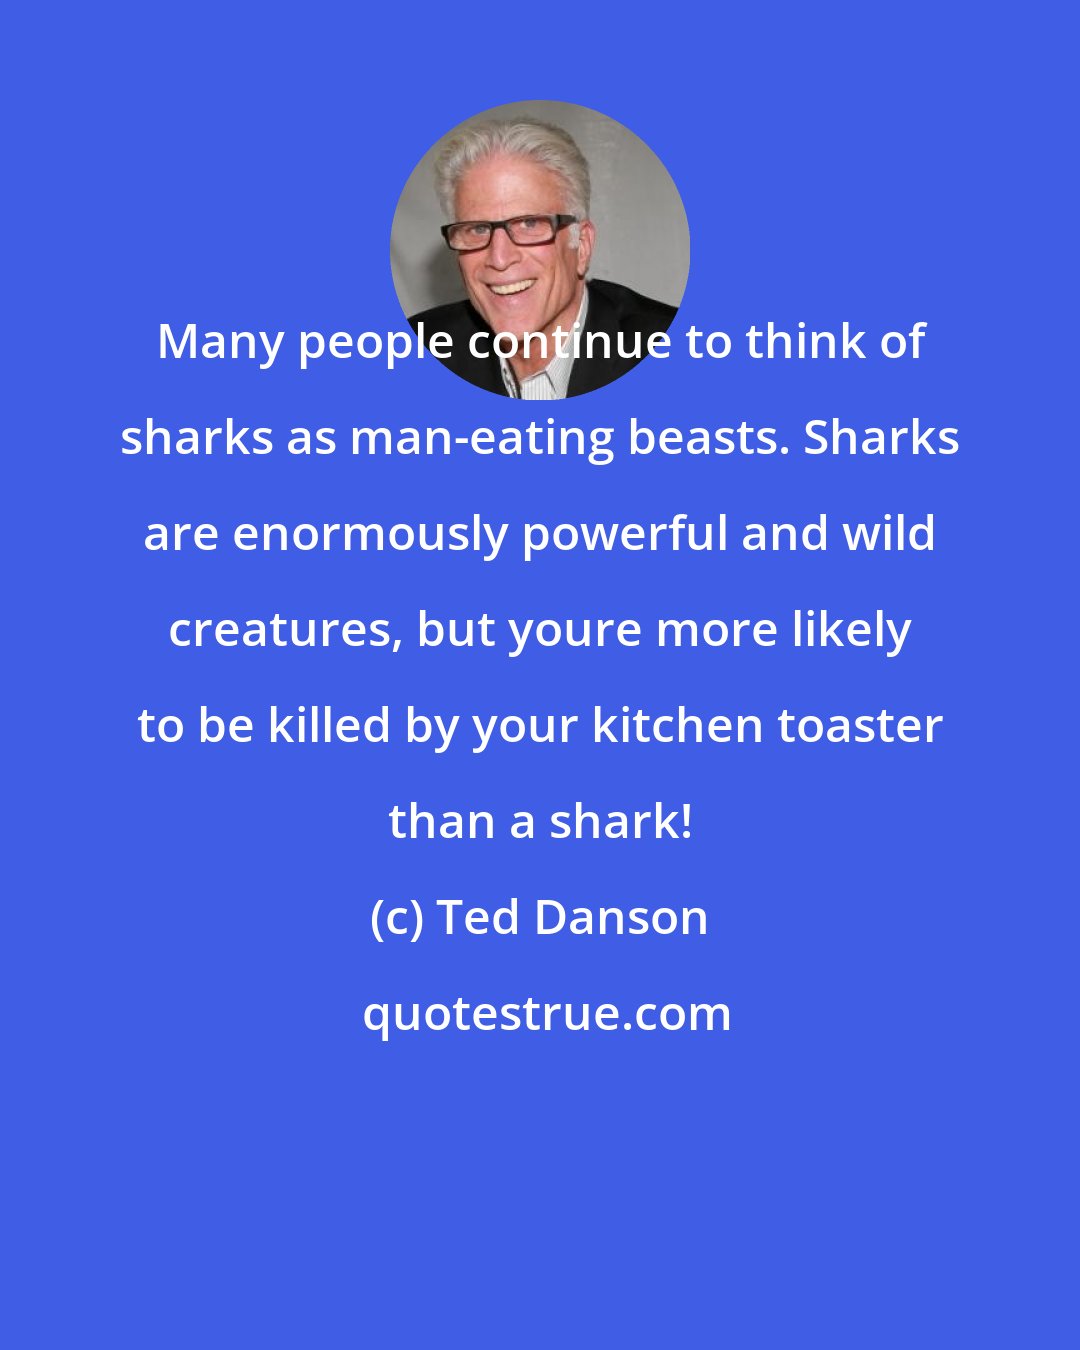 Ted Danson: Many people continue to think of sharks as man-eating beasts. Sharks are enormously powerful and wild creatures, but youre more likely to be killed by your kitchen toaster than a shark!